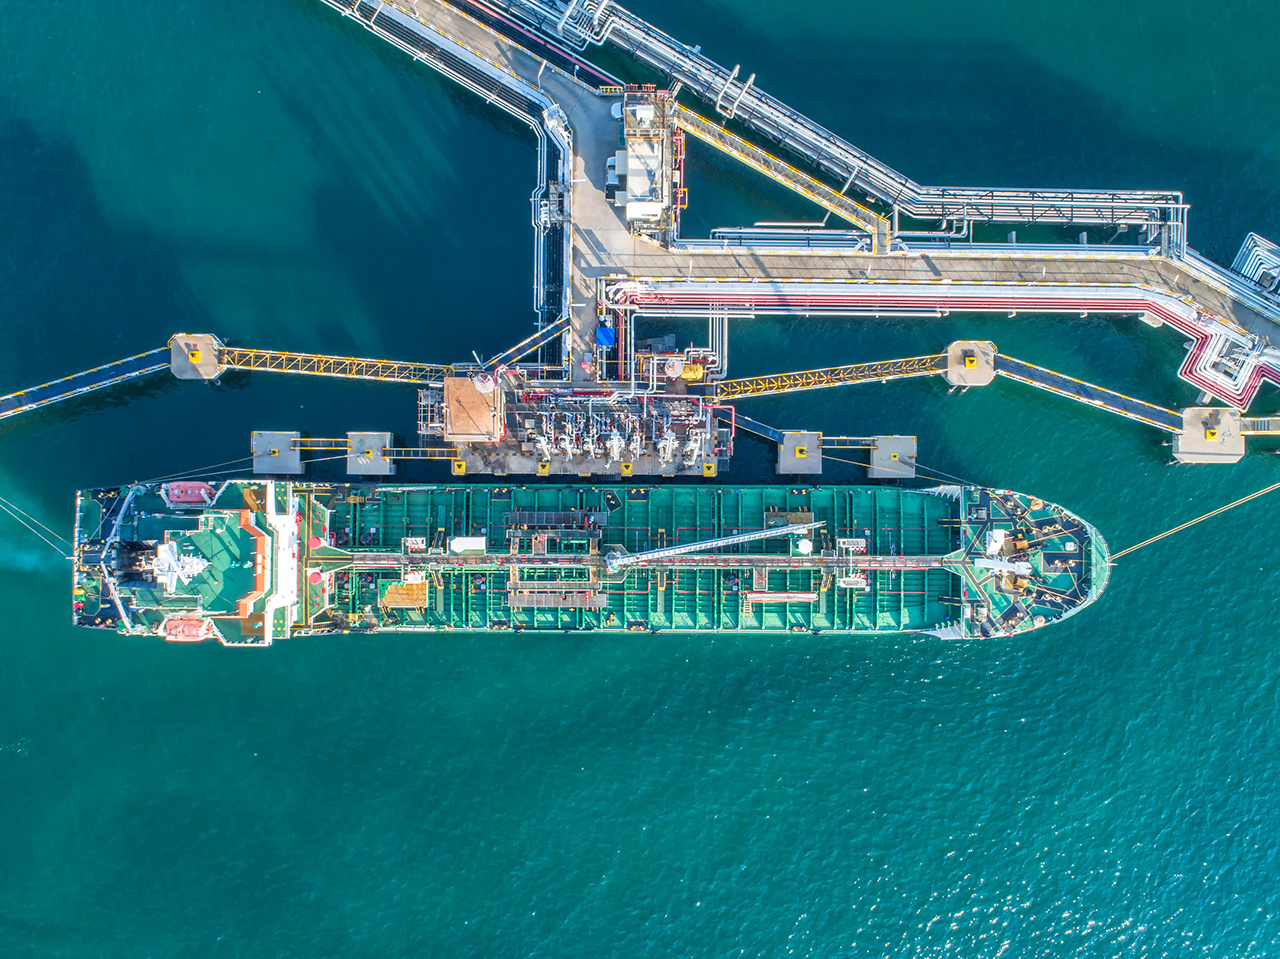 oil tanker, gas tanker in the high sea.Refinery Industry cargo ship,aerial view,Thailand, in import export, LPG,oil refinery, Logistics and transportation with working crane bridge in harbor